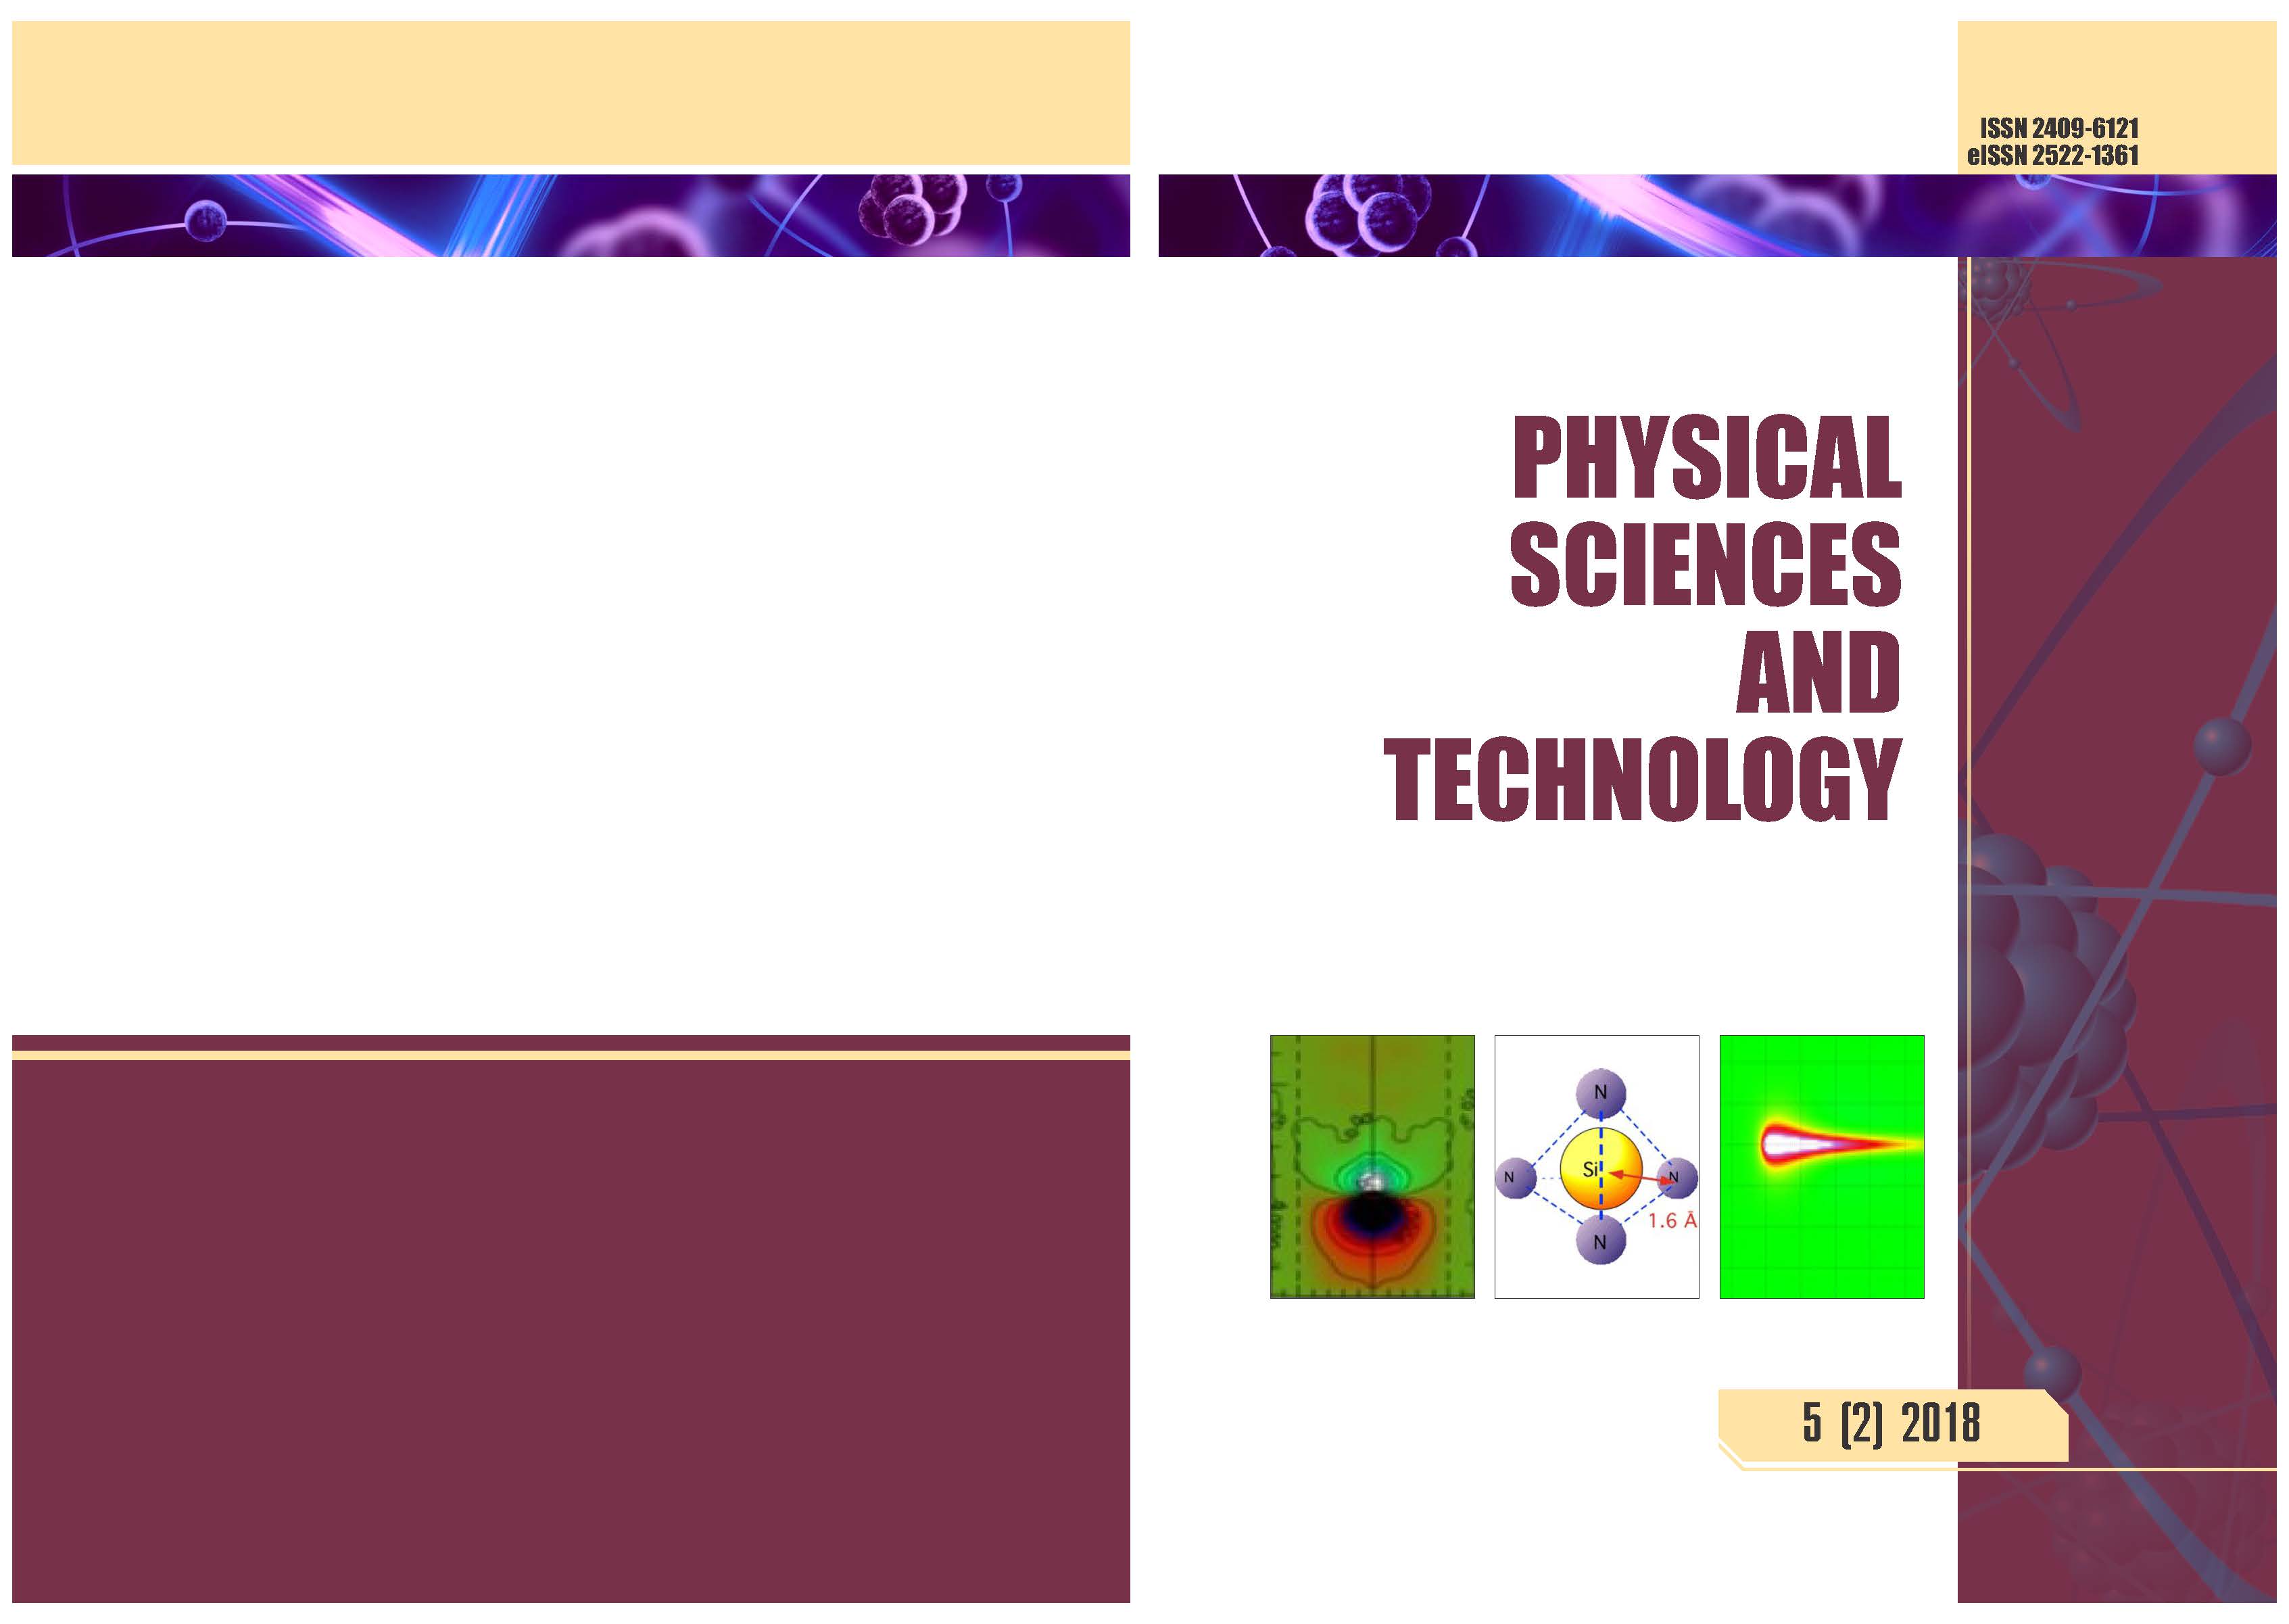 					View Vol. 5 No. 3-4 (2018): PHYSICAL SCIENCES AND TECHNOLOGY
				